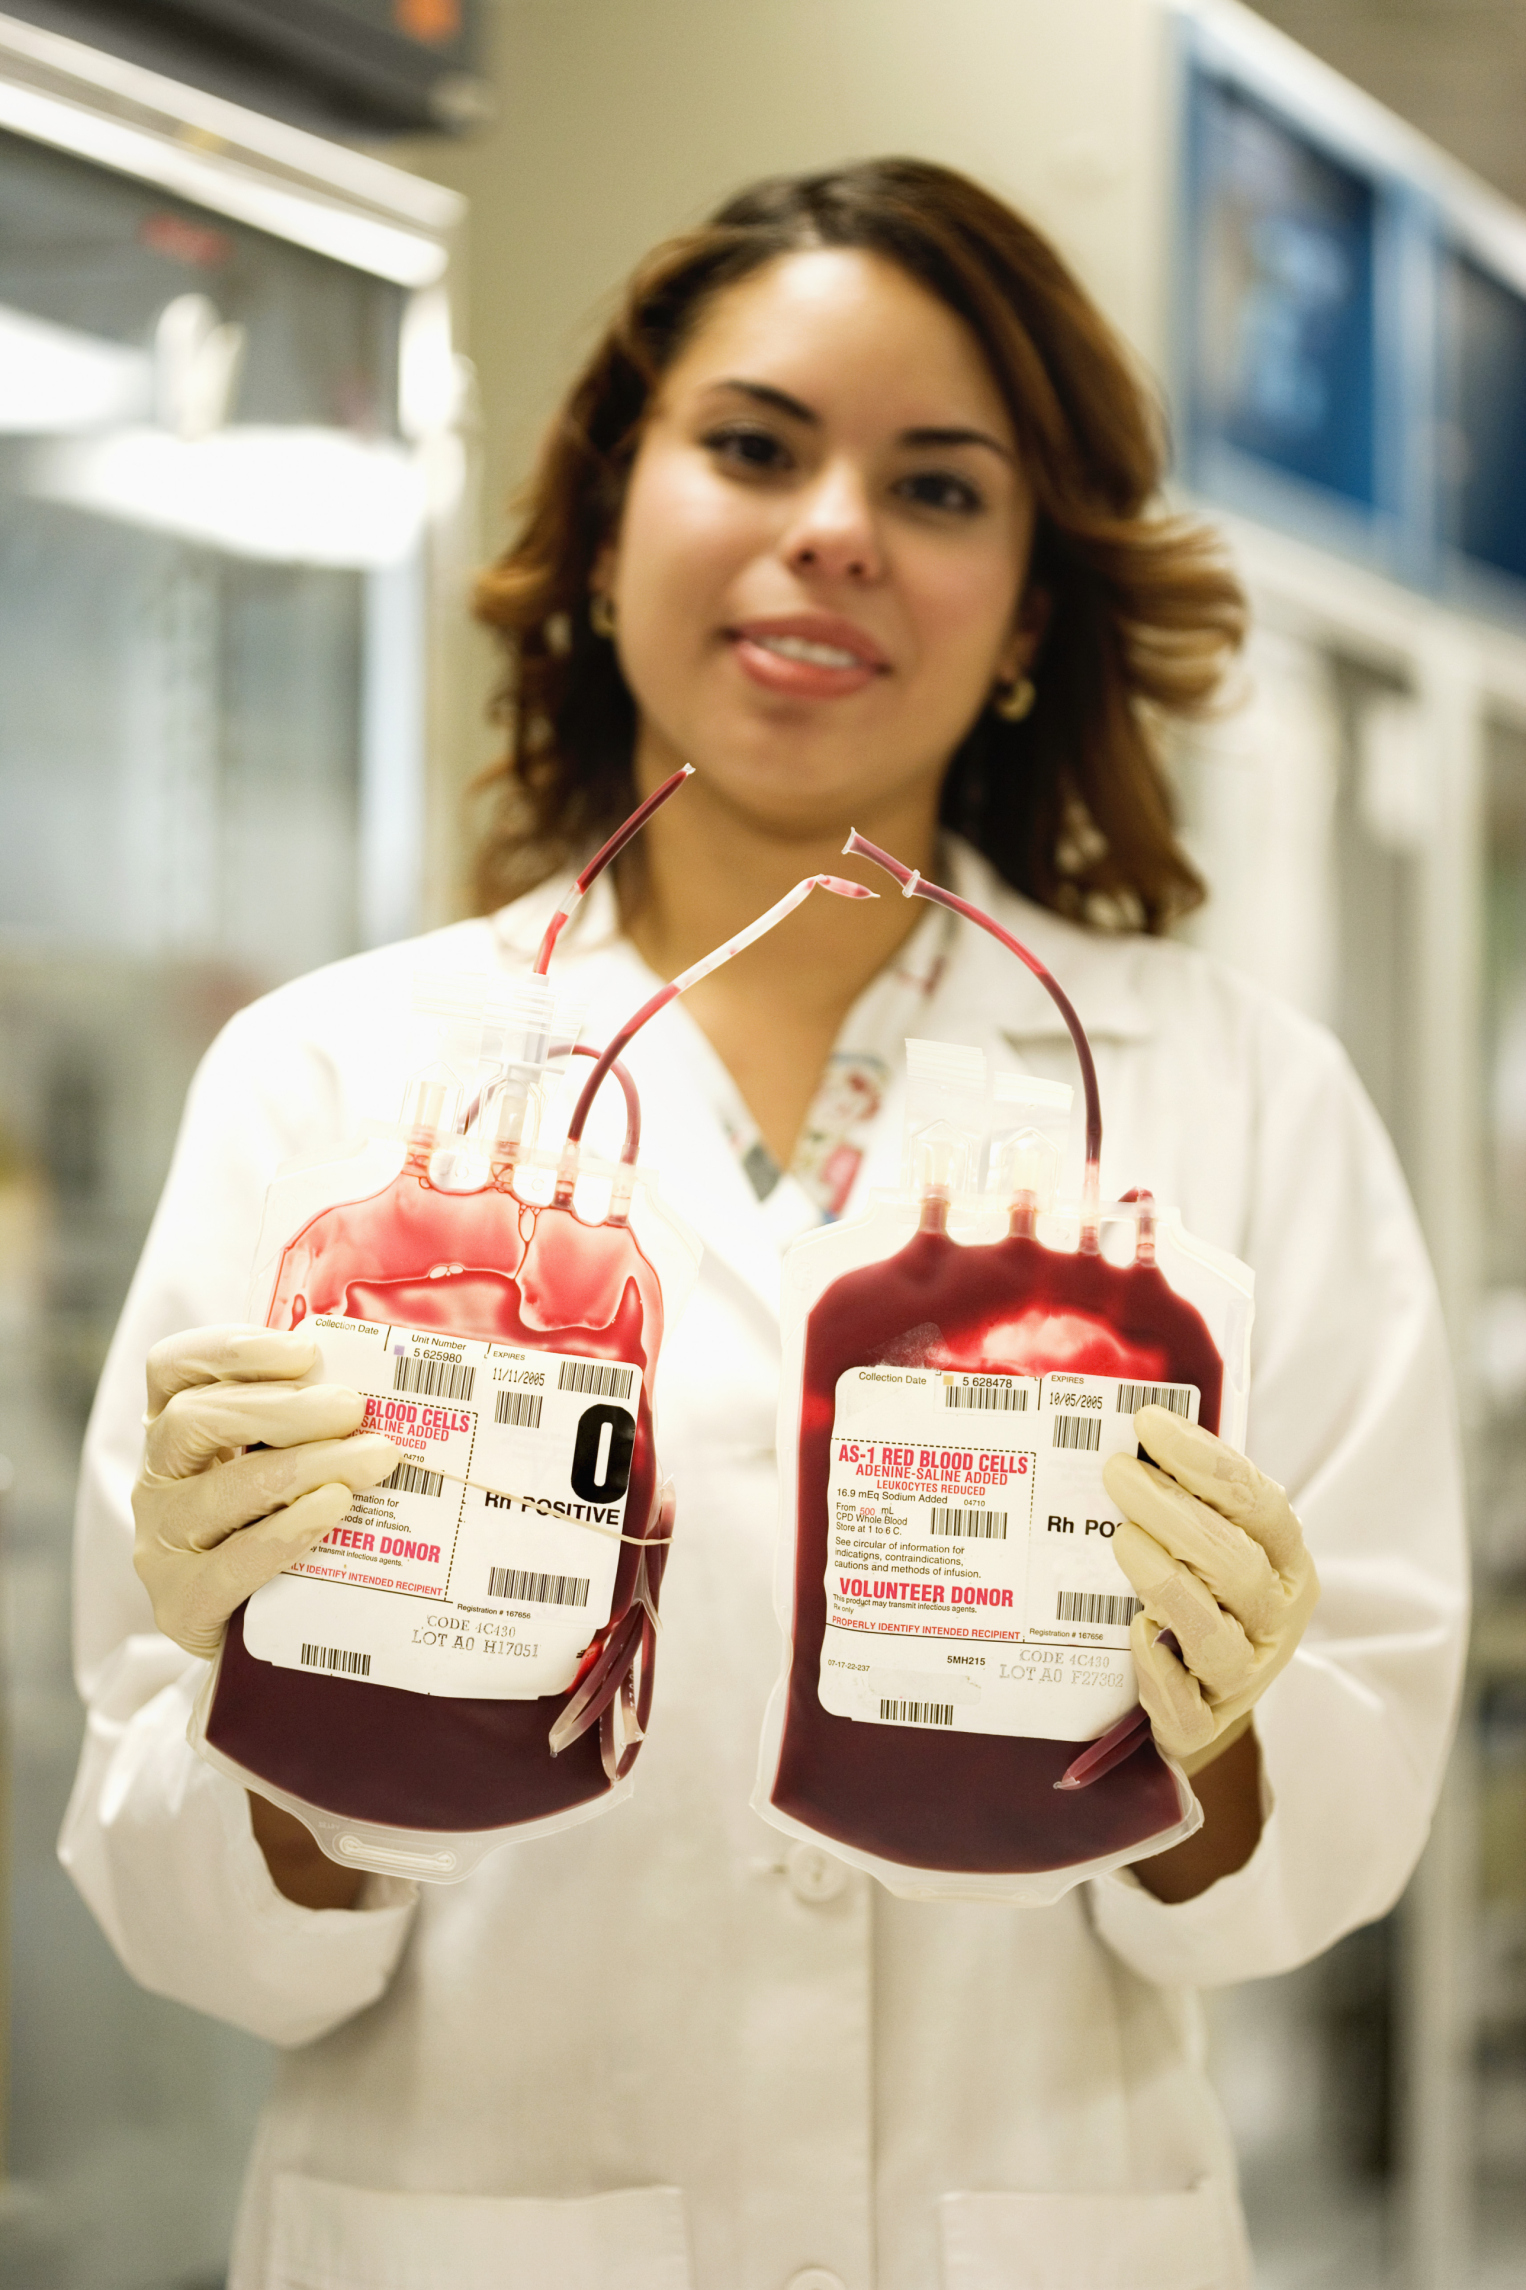 Laboratory Technician with Blood Donations